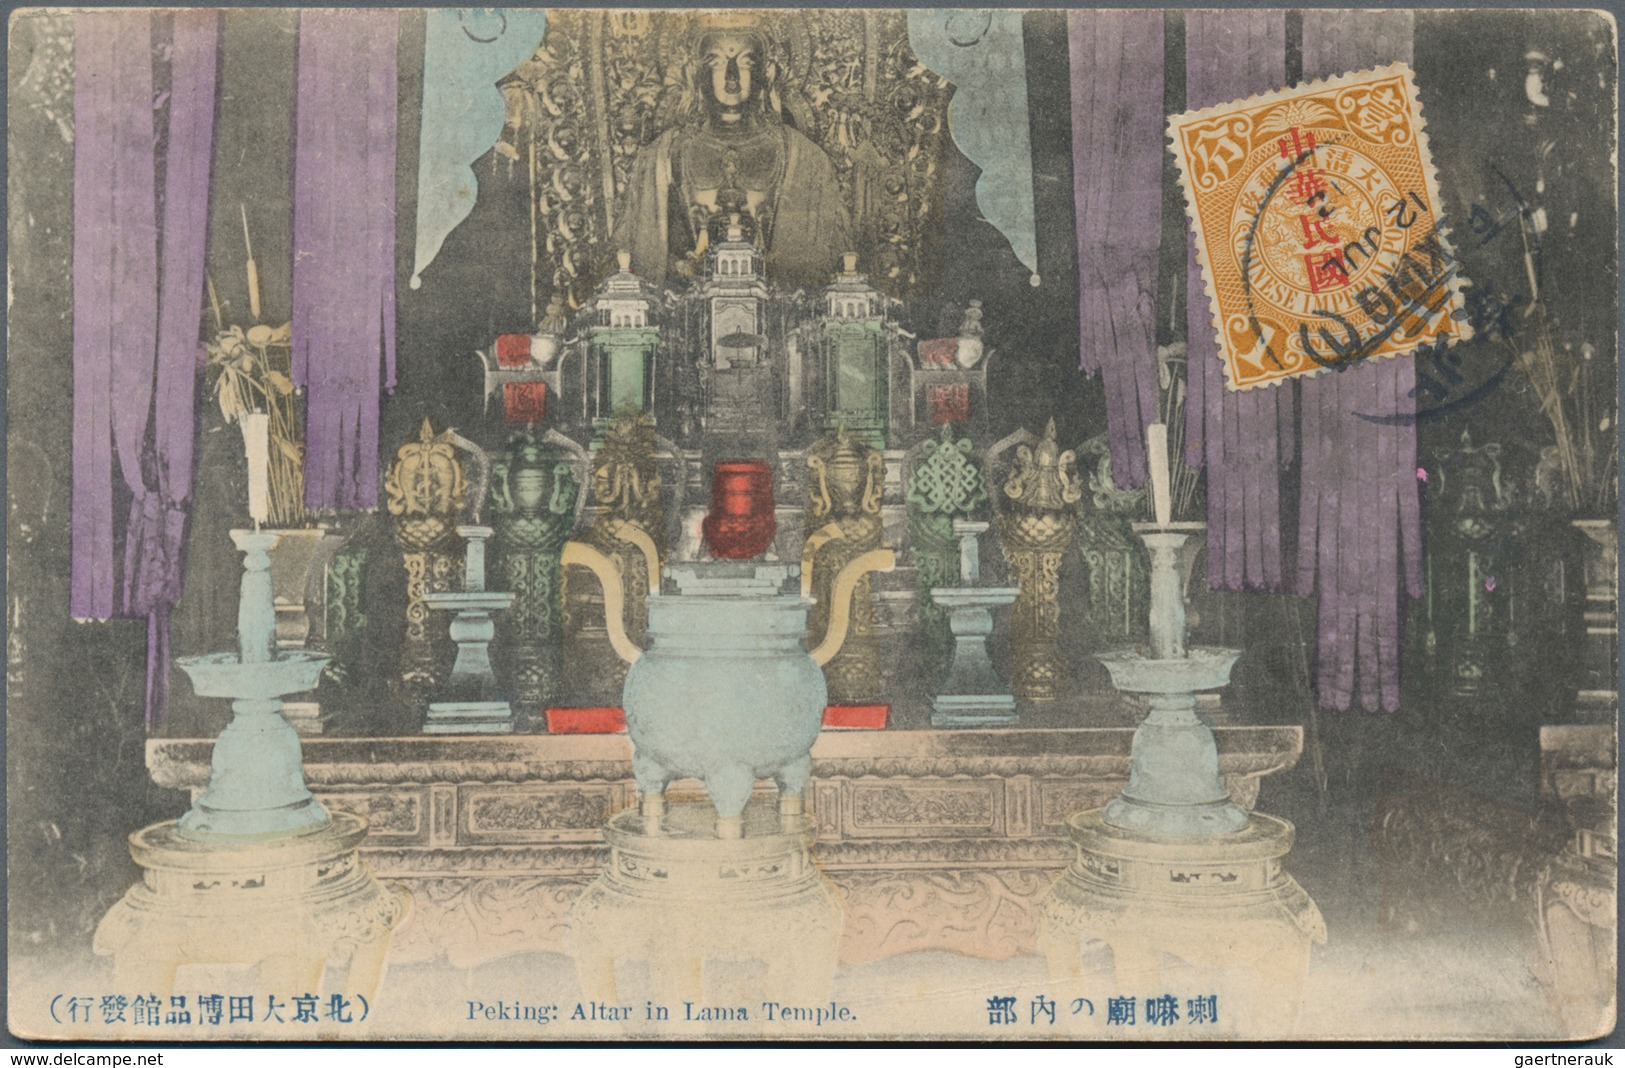 China: 1900/11, picture post cards w. lithos (12) with views mainly of Peking inc. Hotel Tallieu, Rw